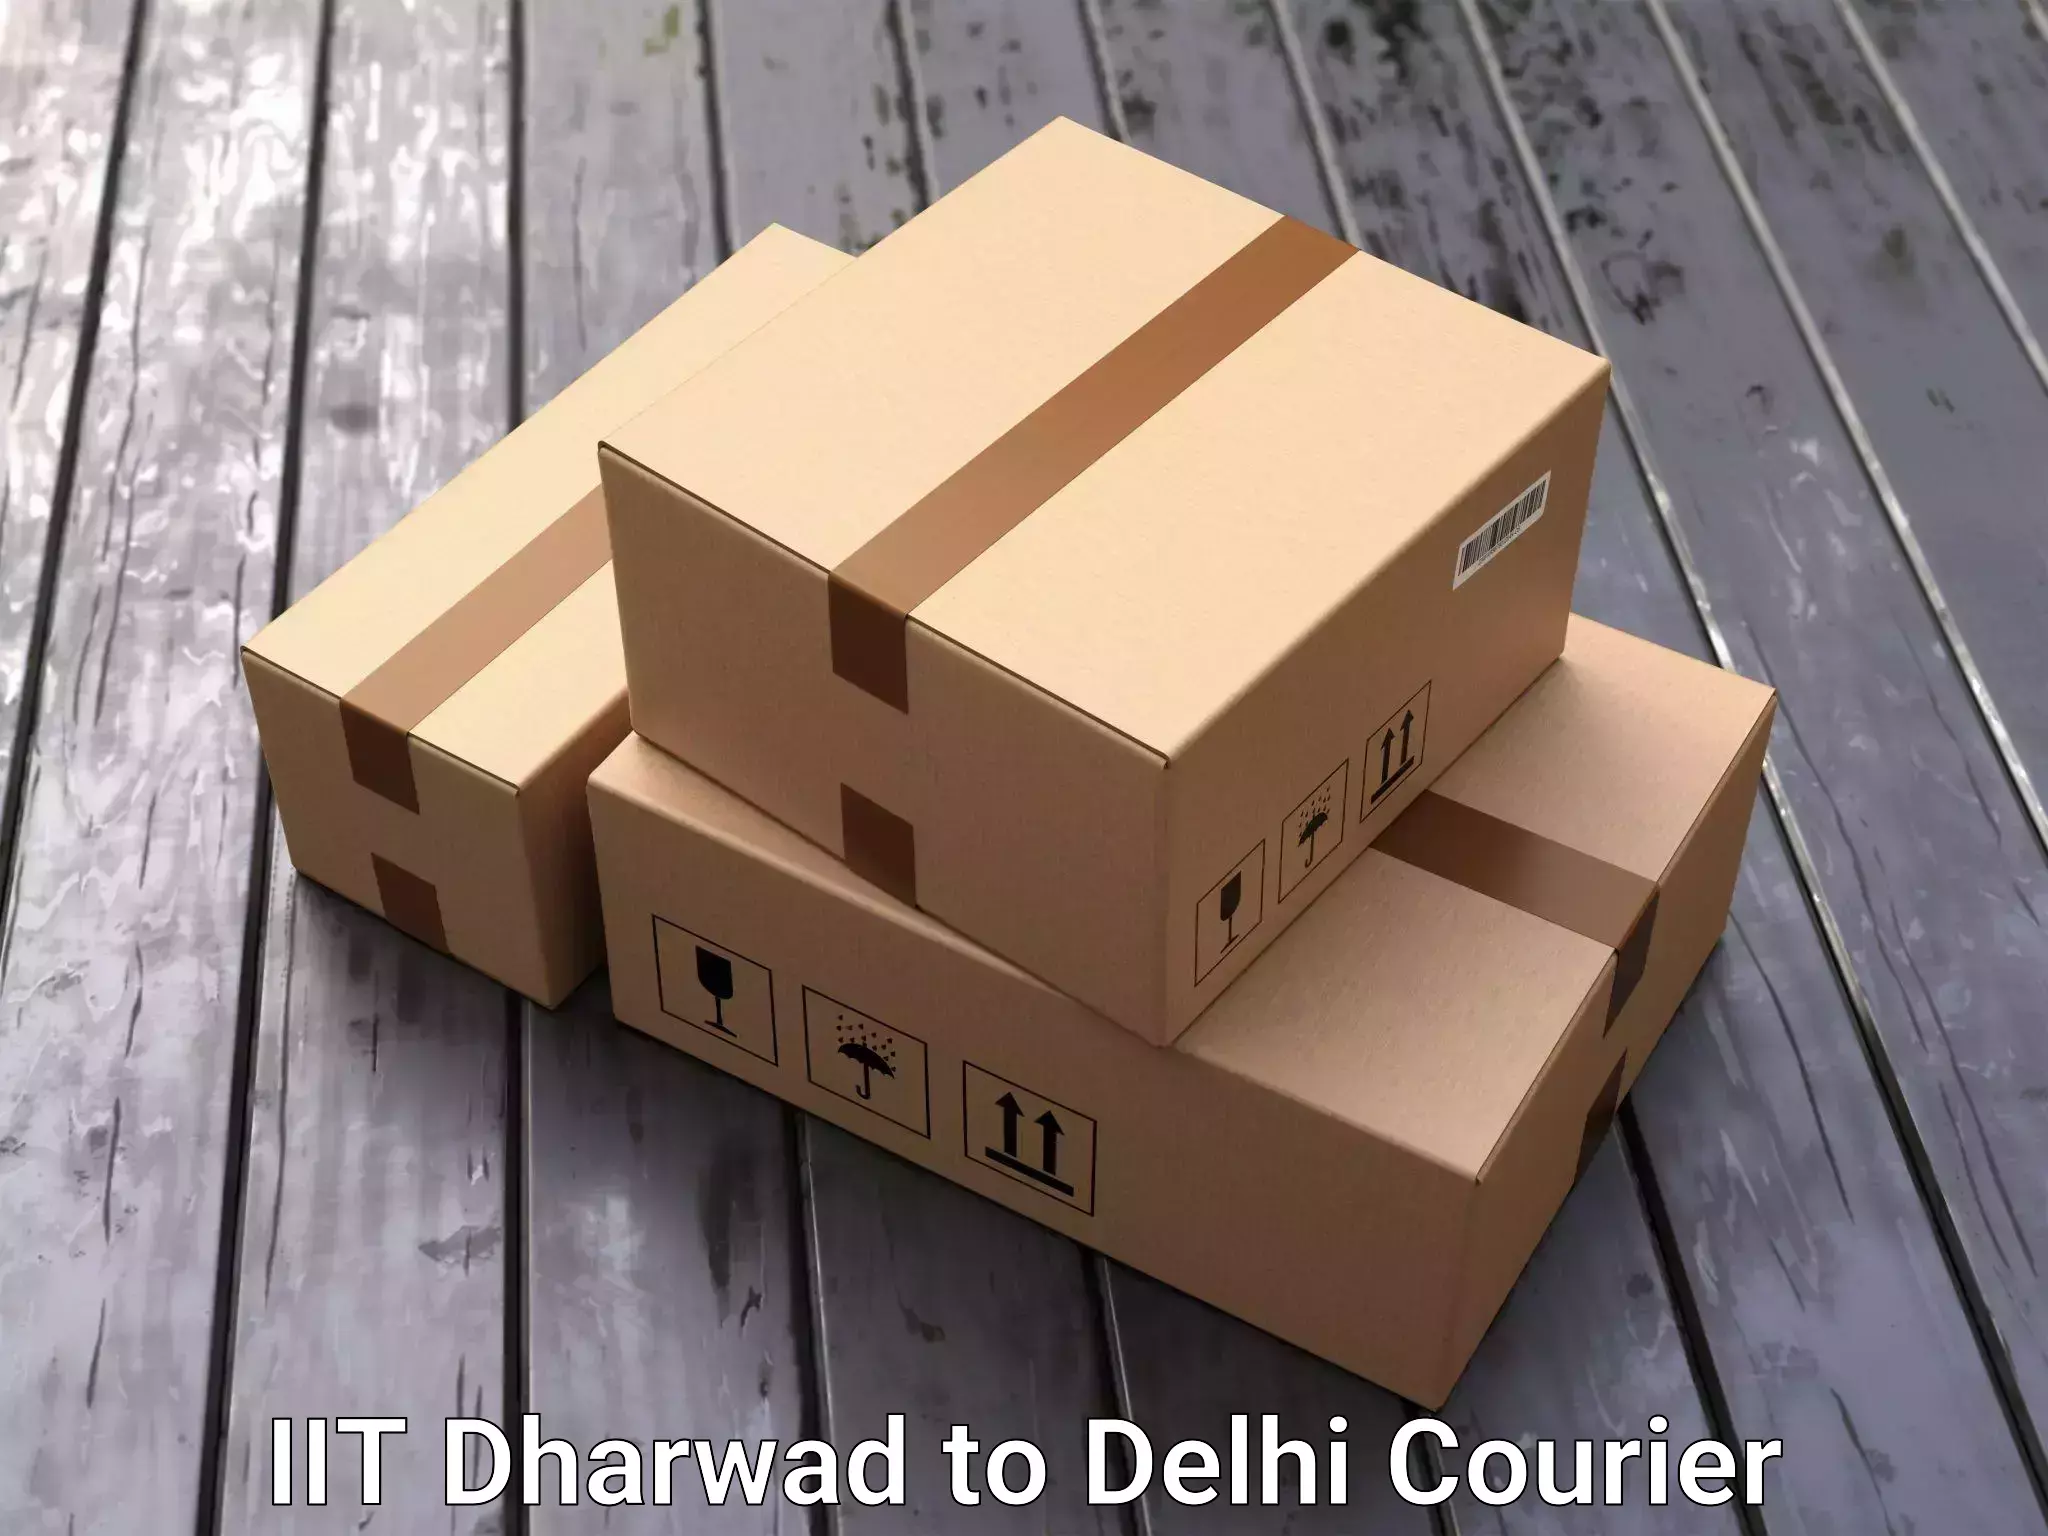 Budget-friendly movers IIT Dharwad to NCR